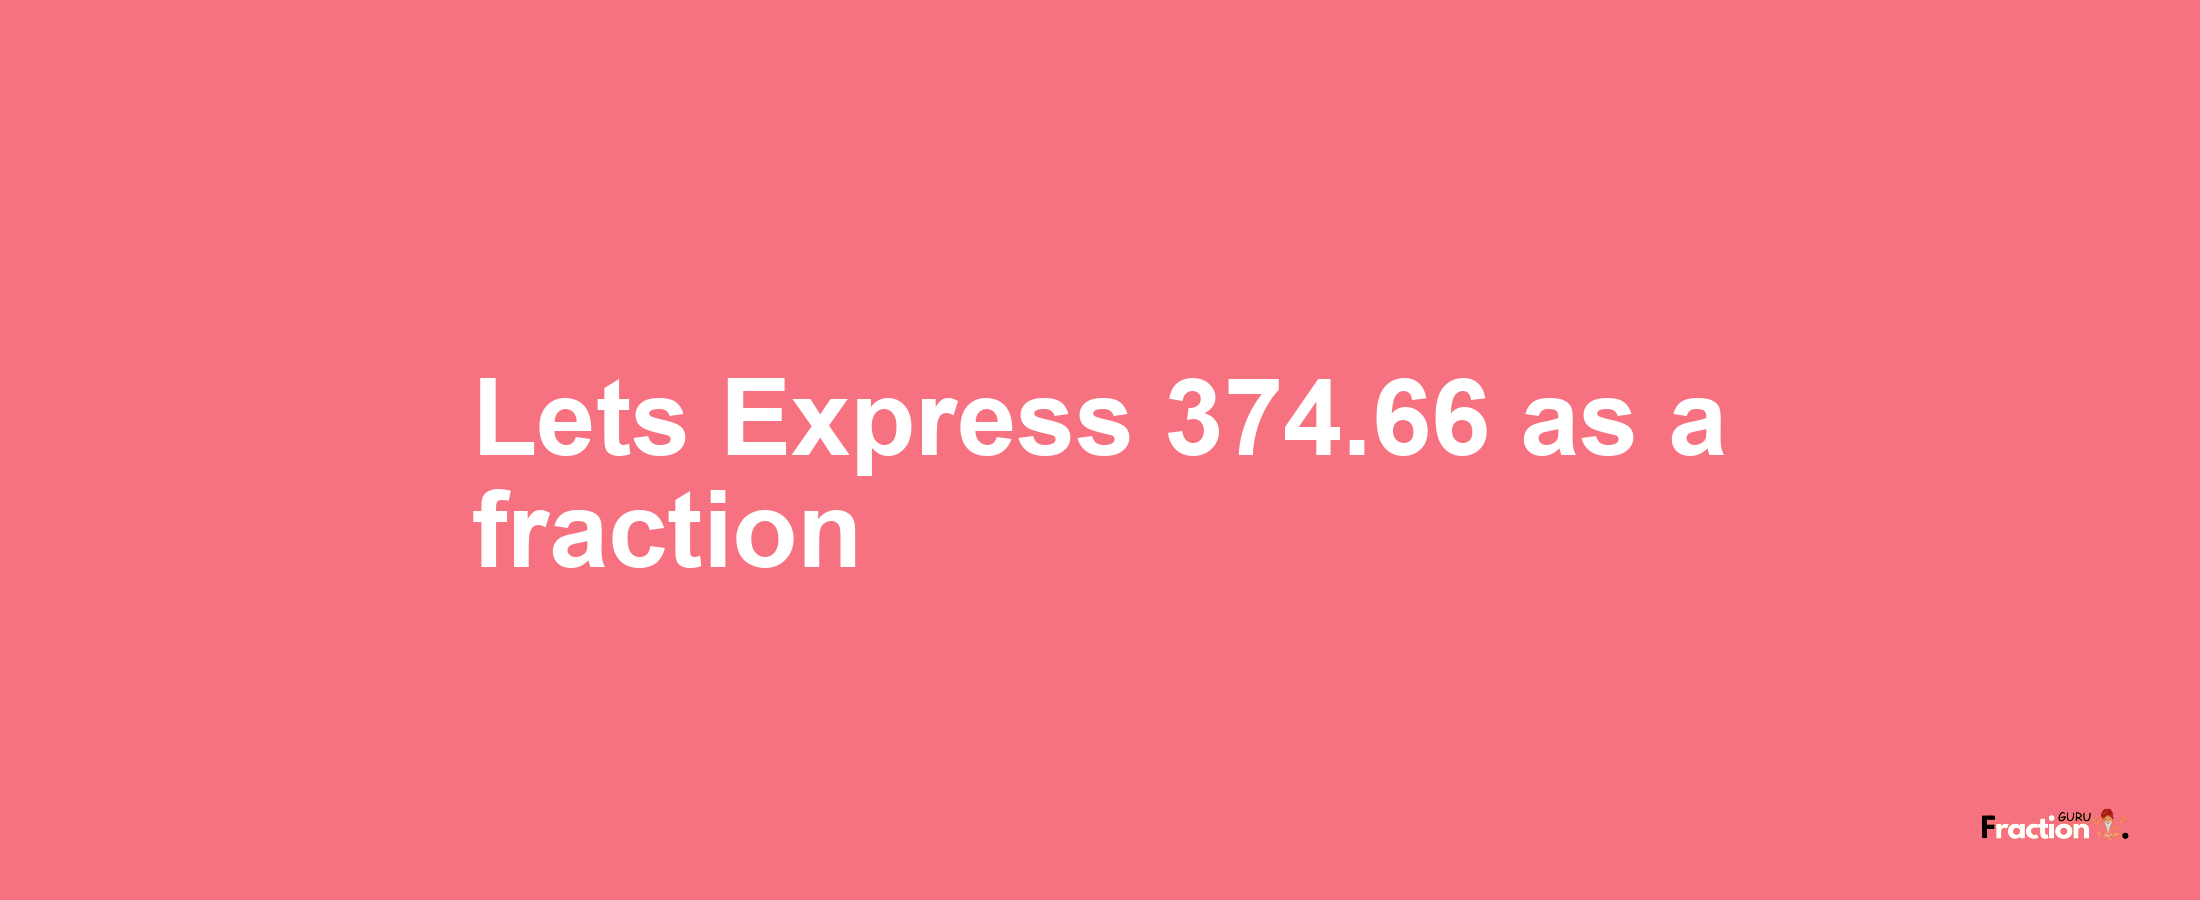 Lets Express 374.66 as afraction